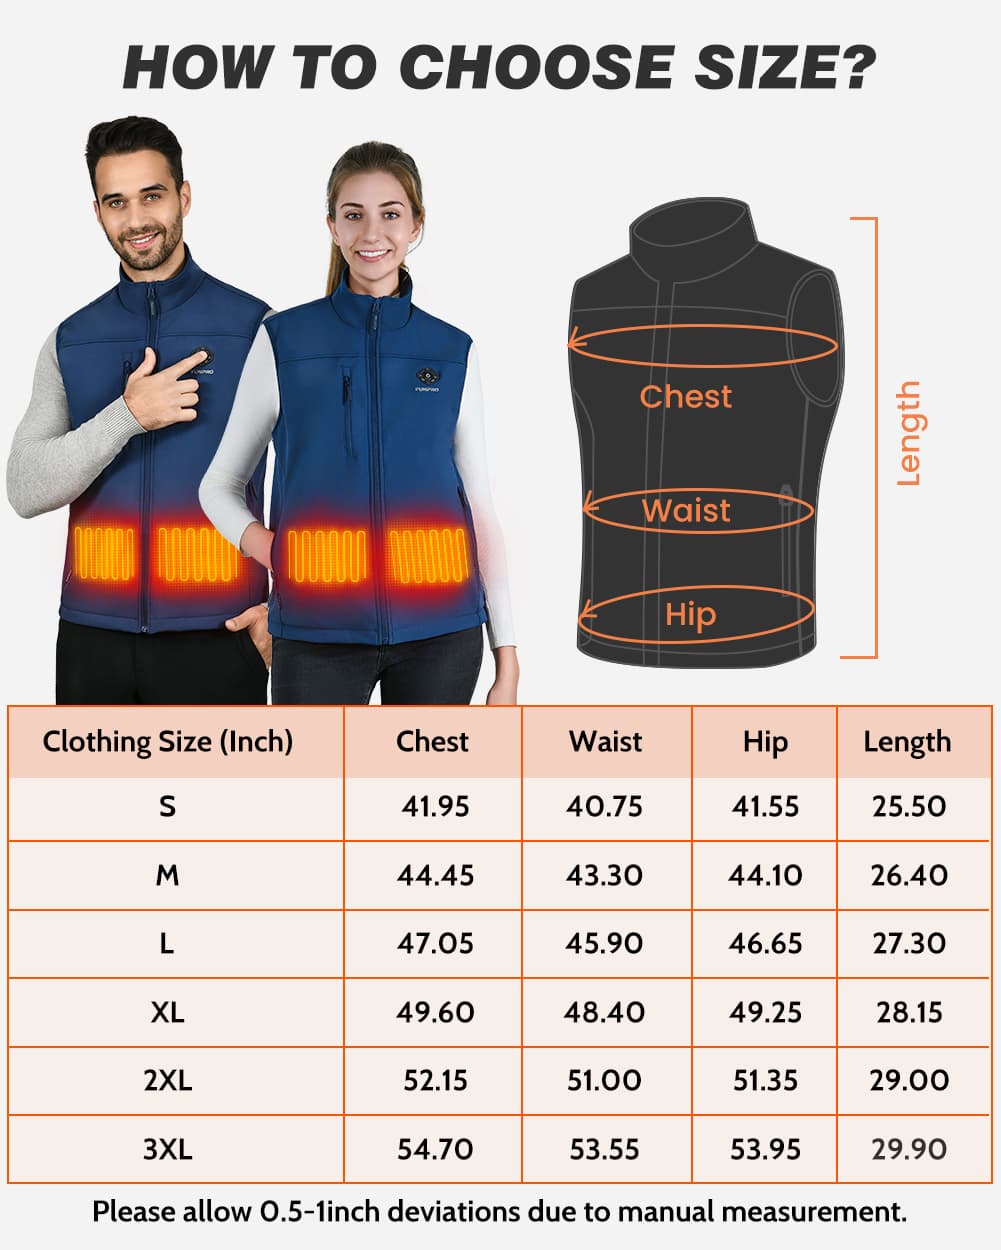 Funpro women's composite heated vest (without battery)